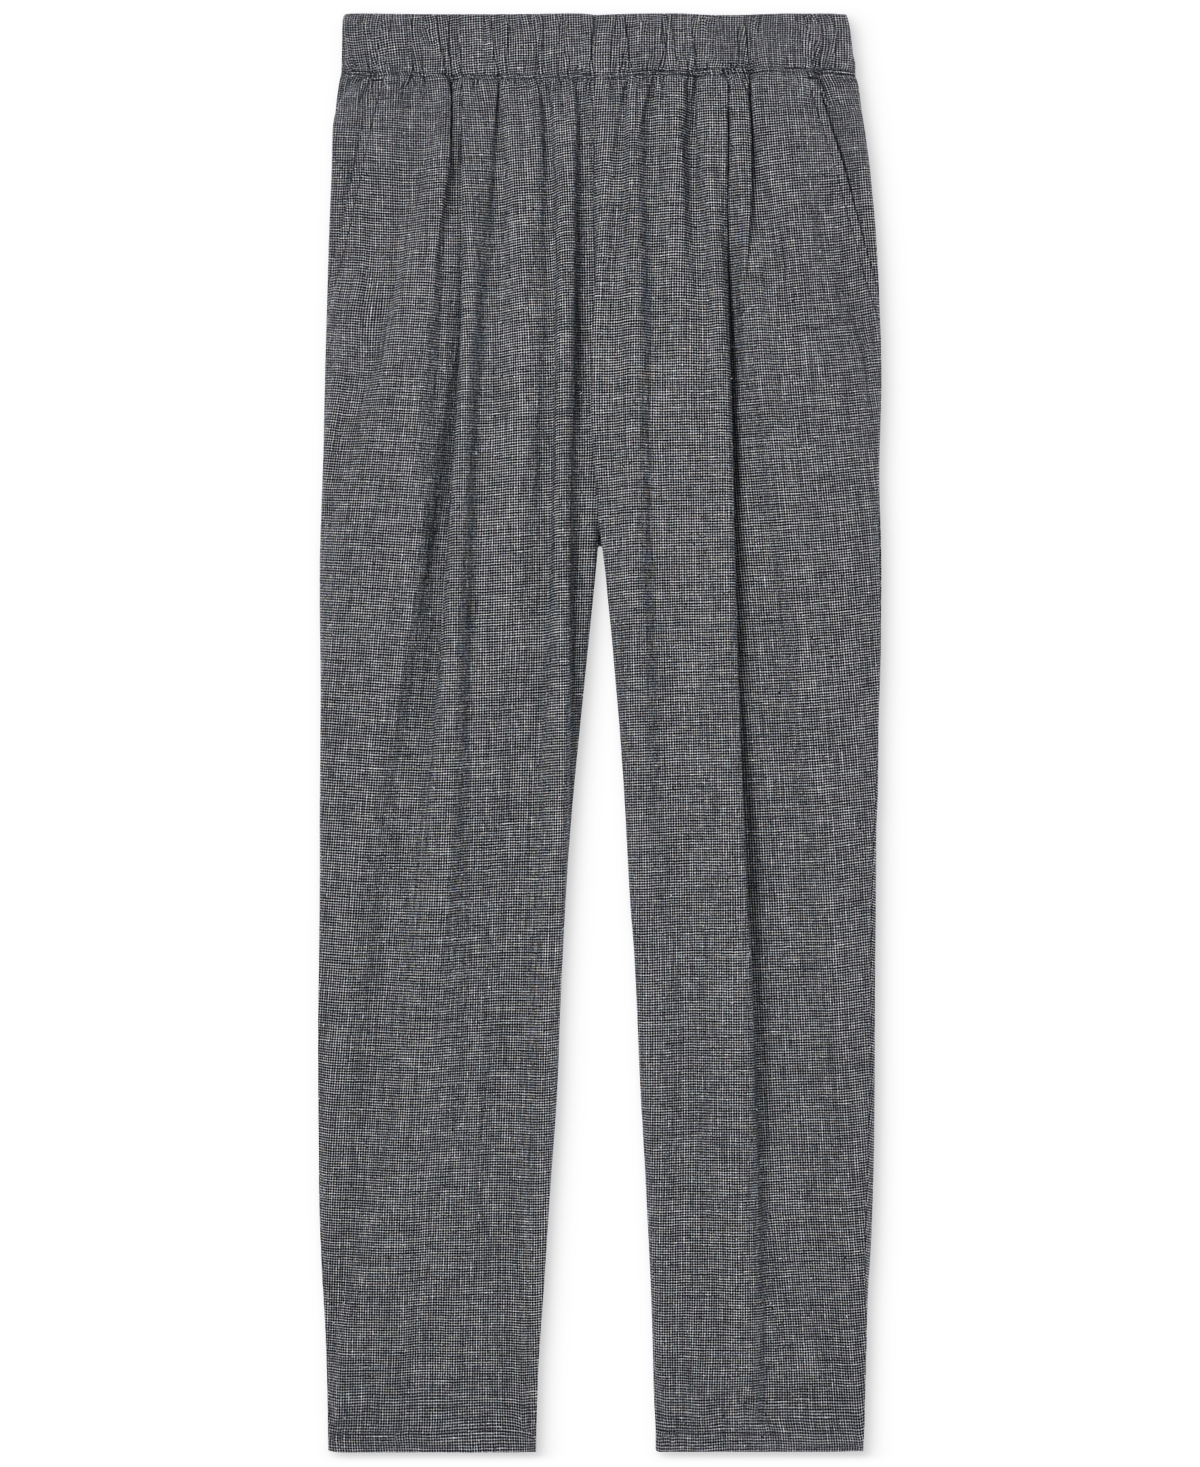 Eileen Fisher Women's Tapered Textured Ankle Pants